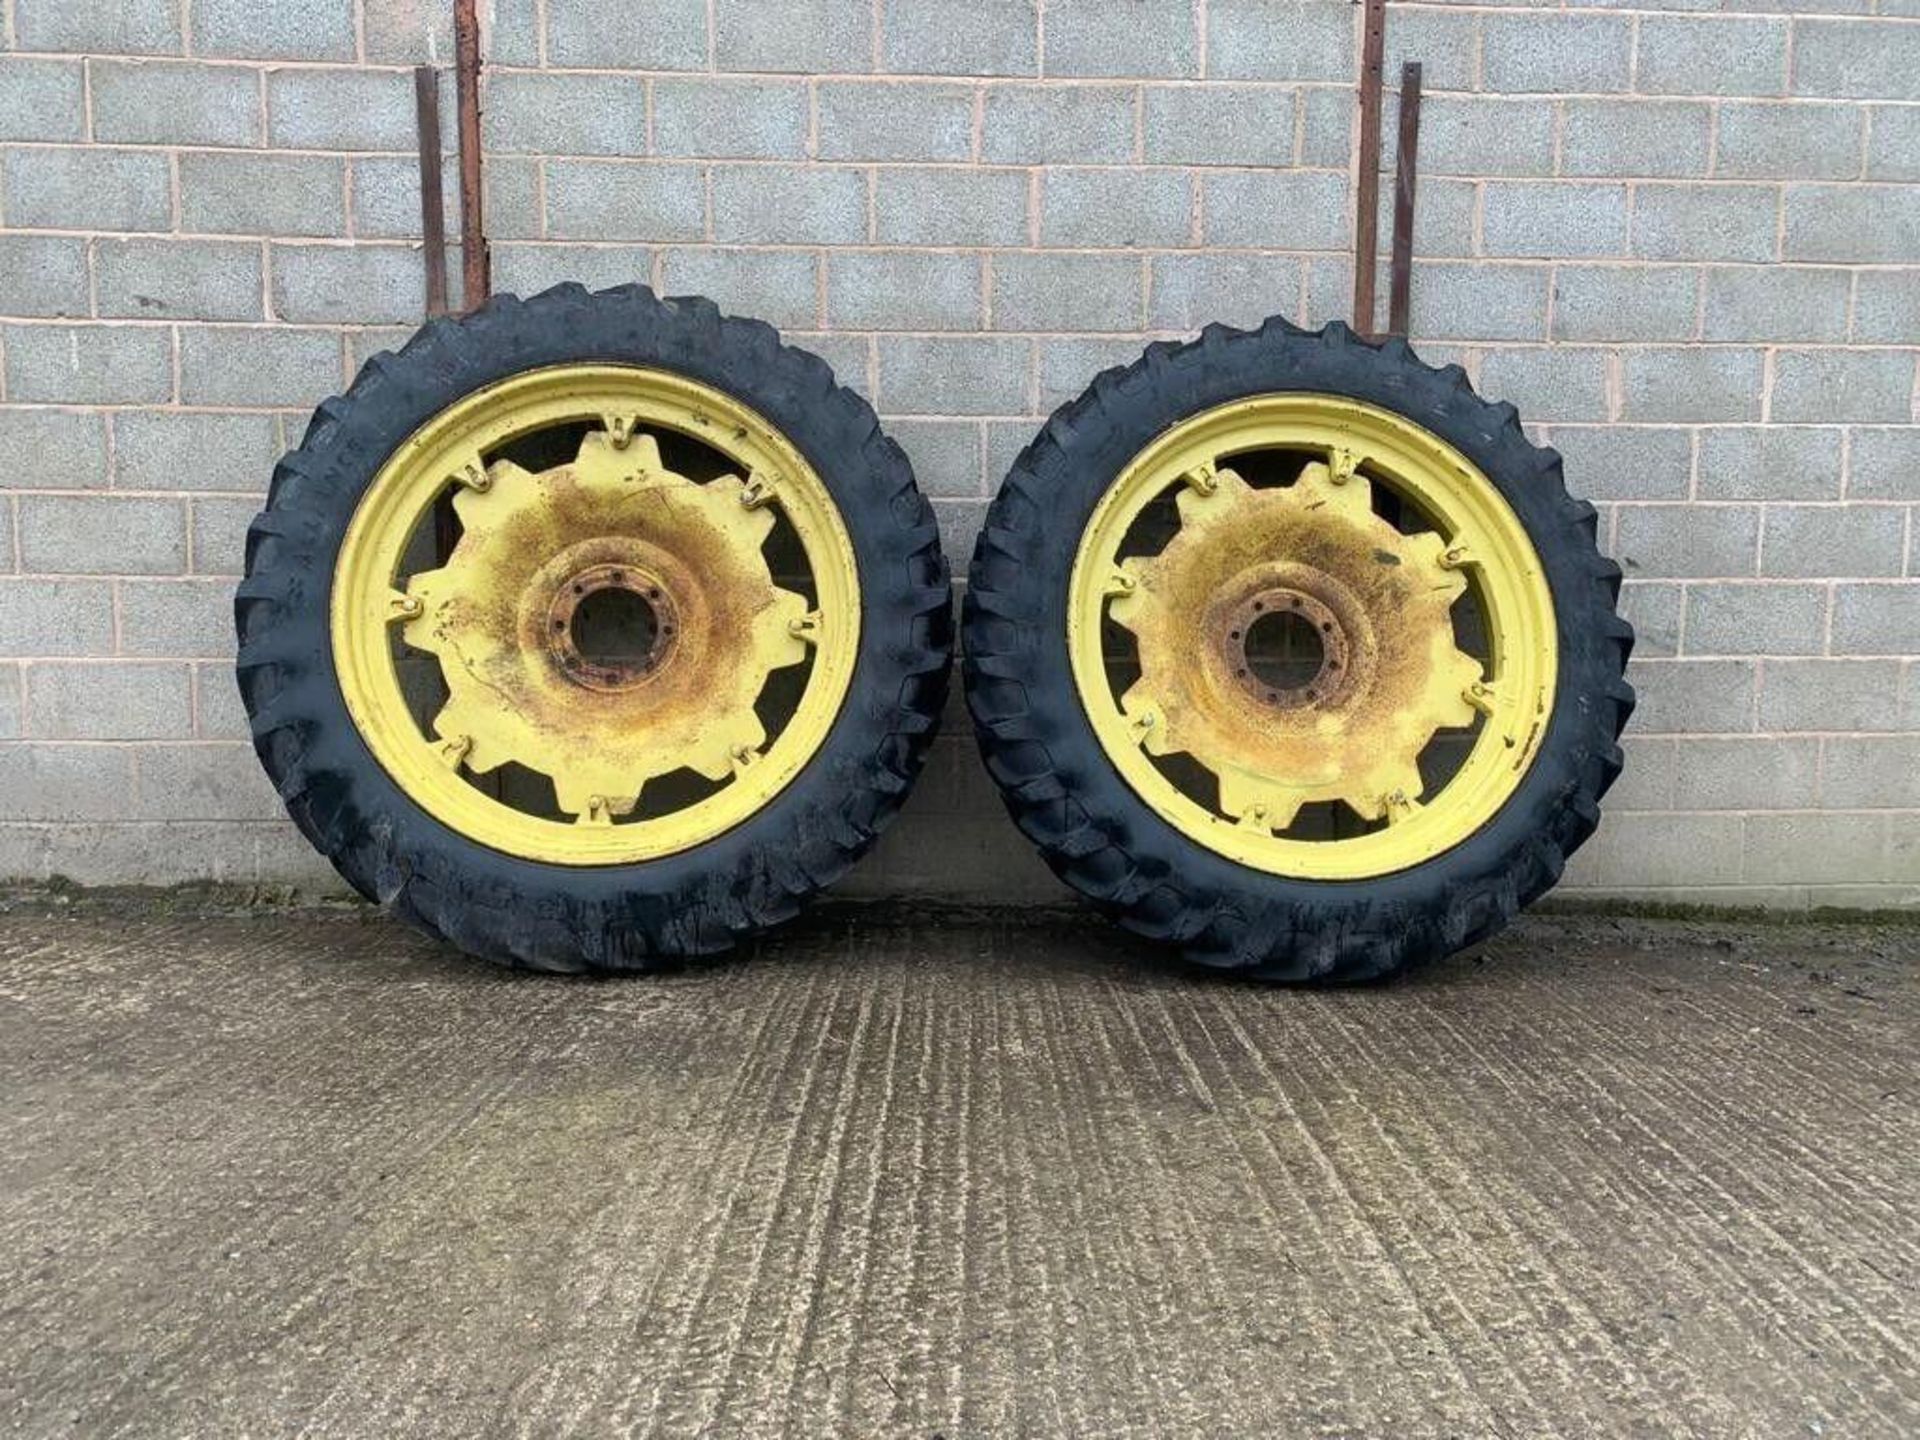 2No. 13.6R48 Alliance 48A8/159A2 Tyres on 8 Stud Wheels - (Shropshire) - Image 2 of 6